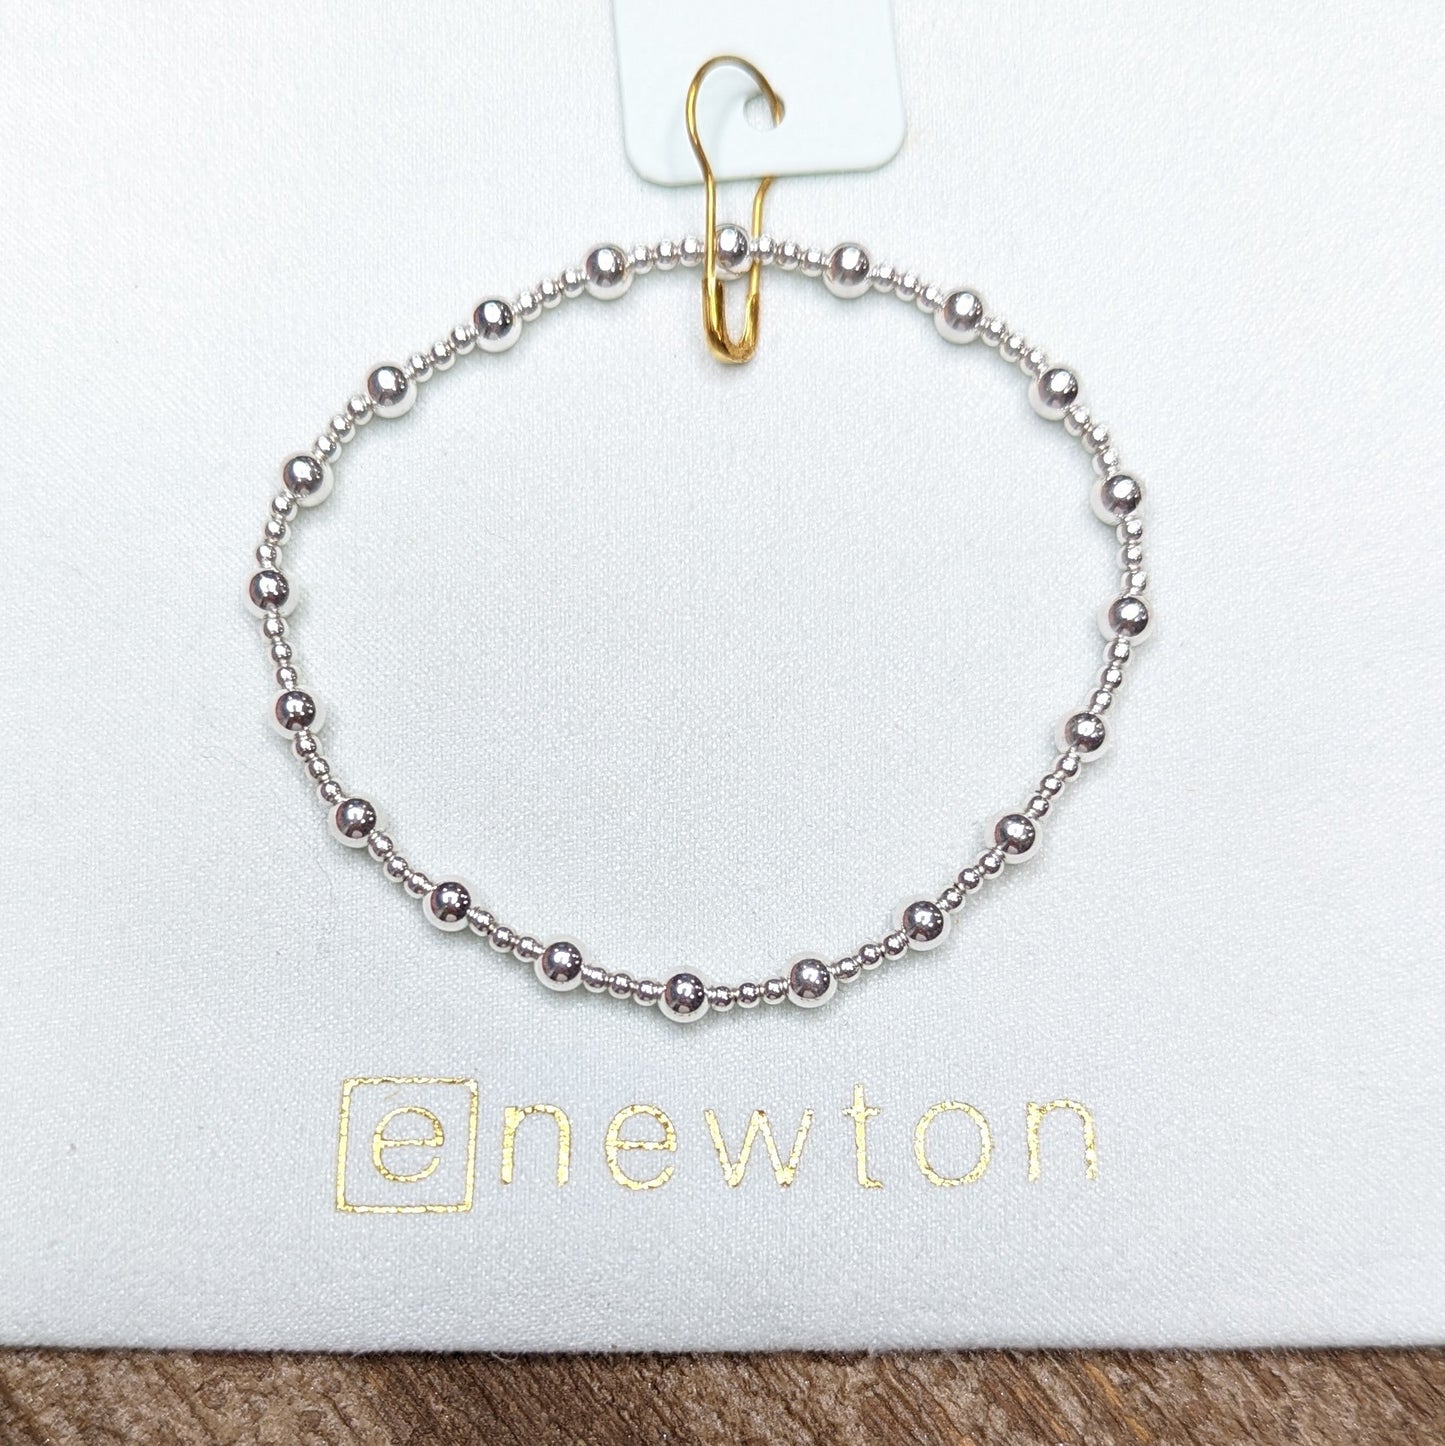 Classic sterling silver 4mm Sincerity bracelet by eNewton. Shop at The Painted Cottage in Edgewater, MD